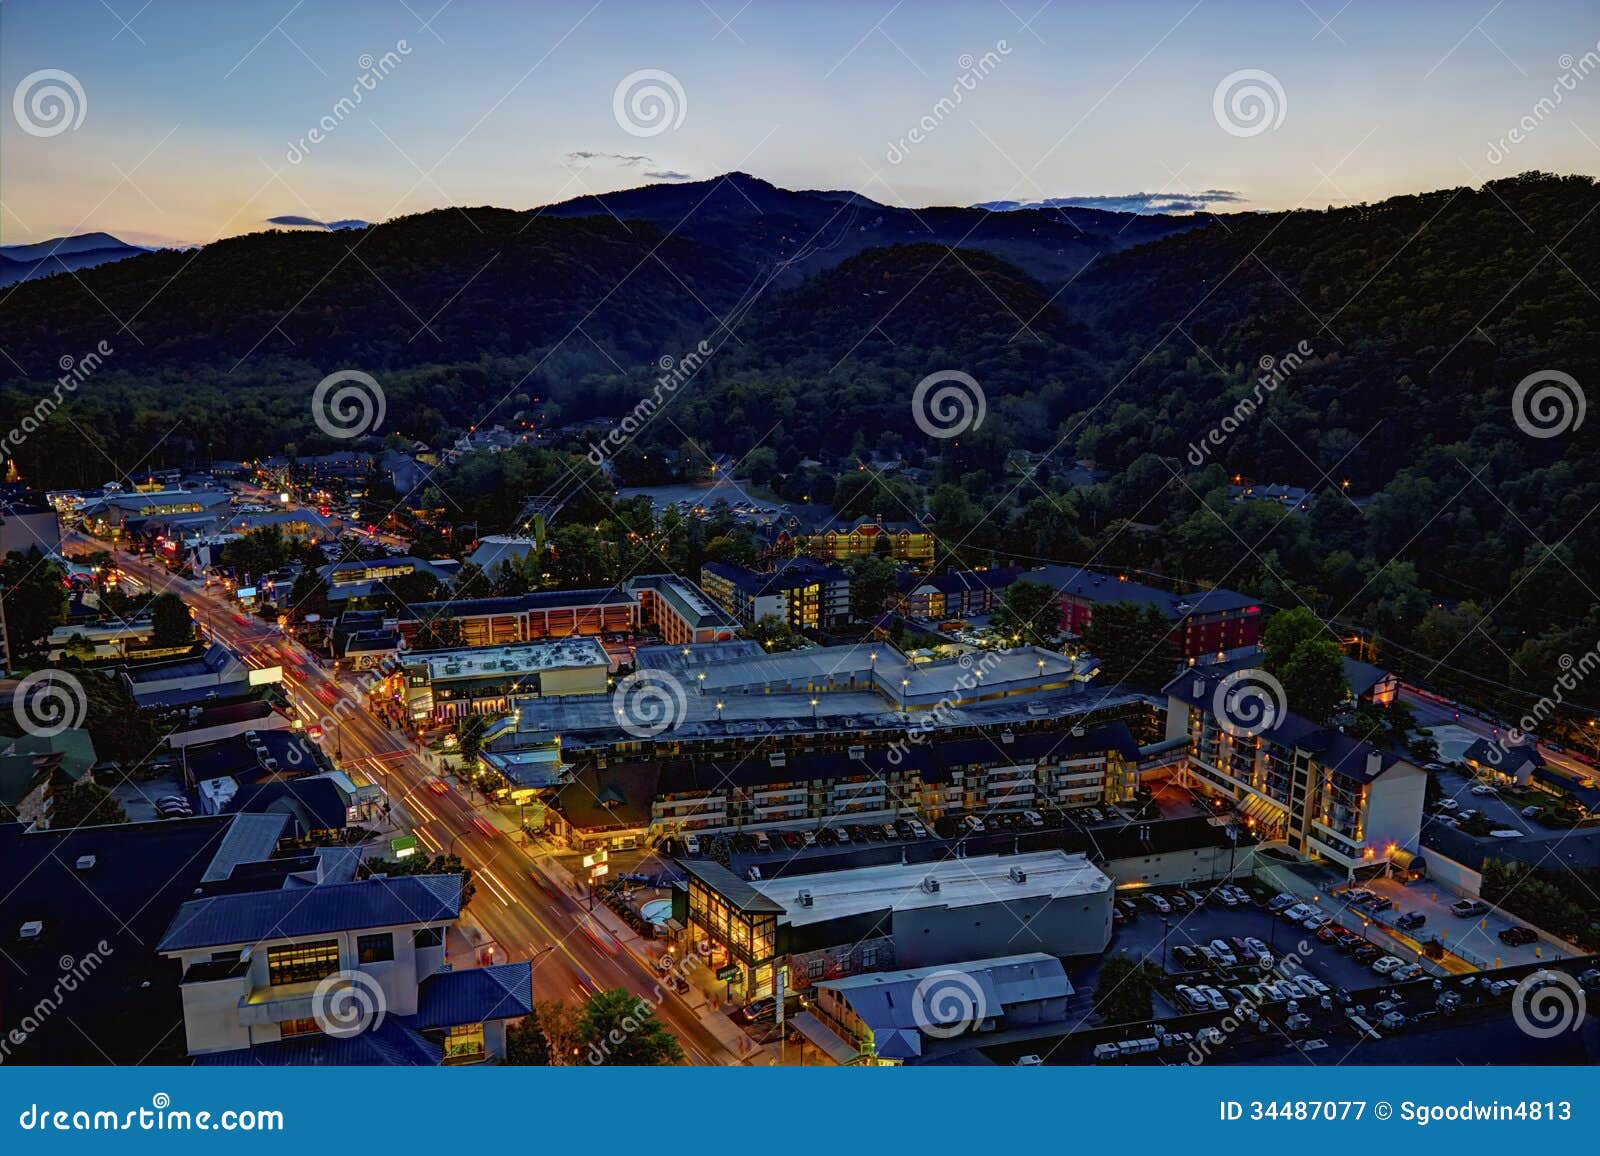 aerial night view of the main road through gatlinburg, tennessee